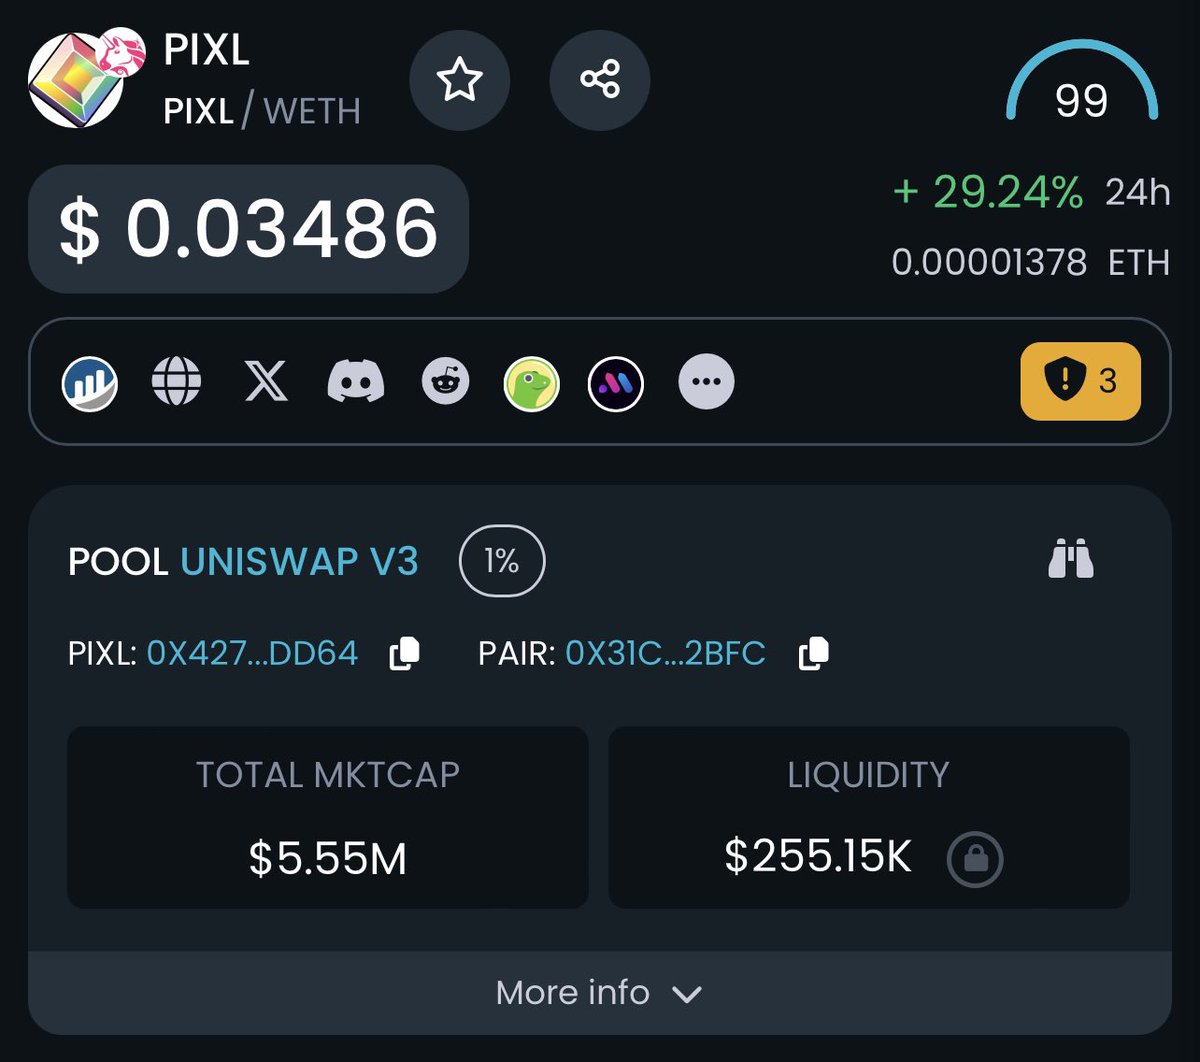 $Pixl resurrected JuicySeal and taking us all to the moon 🚀🌙